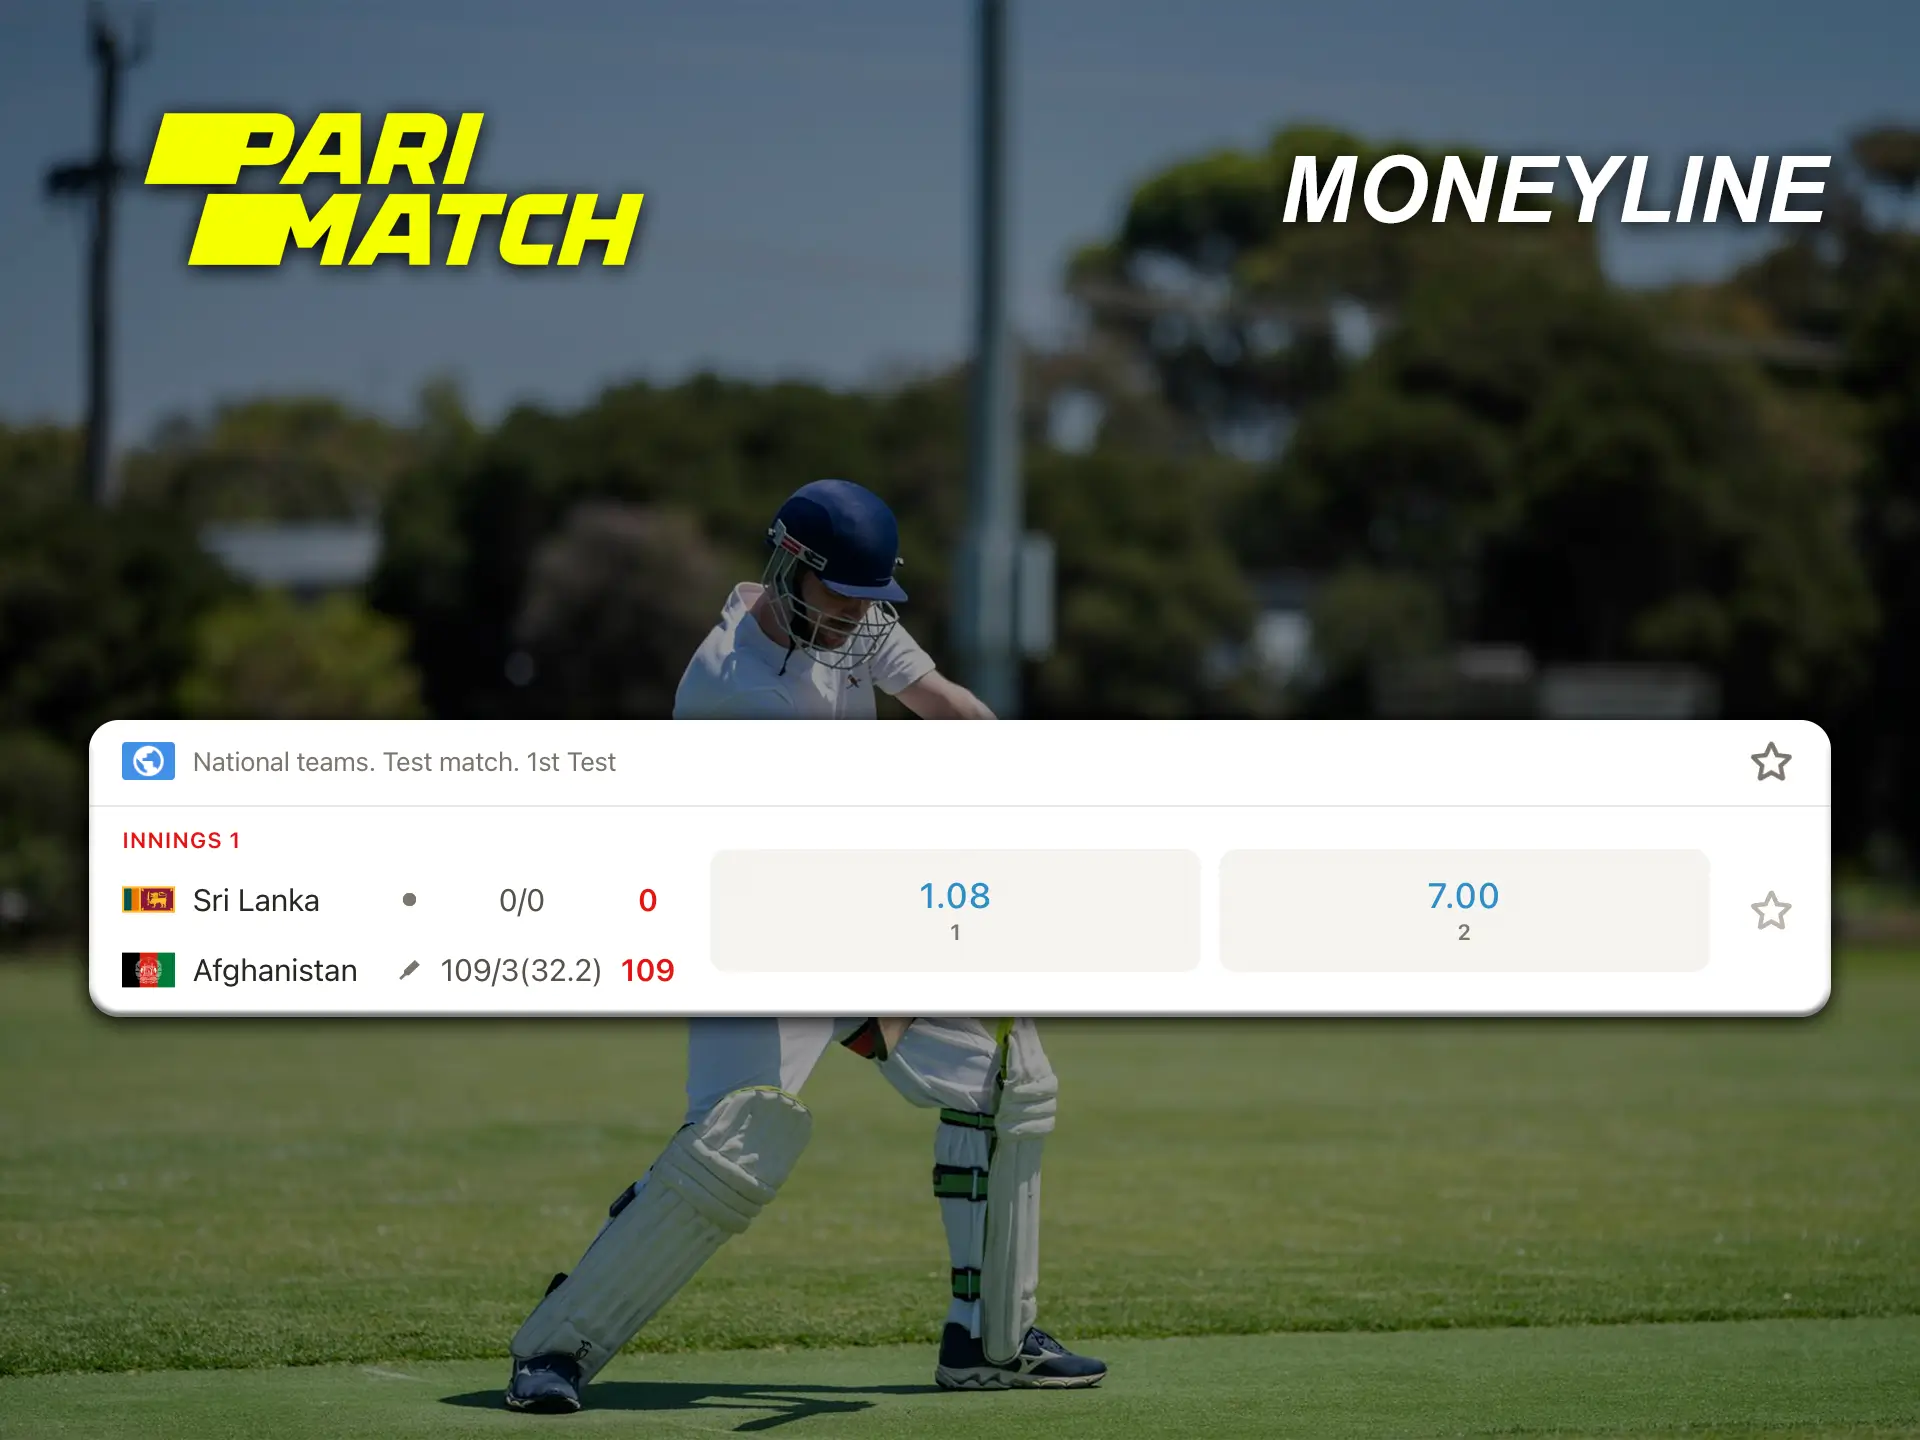 Place your bets at PariMatch on your favourite team.